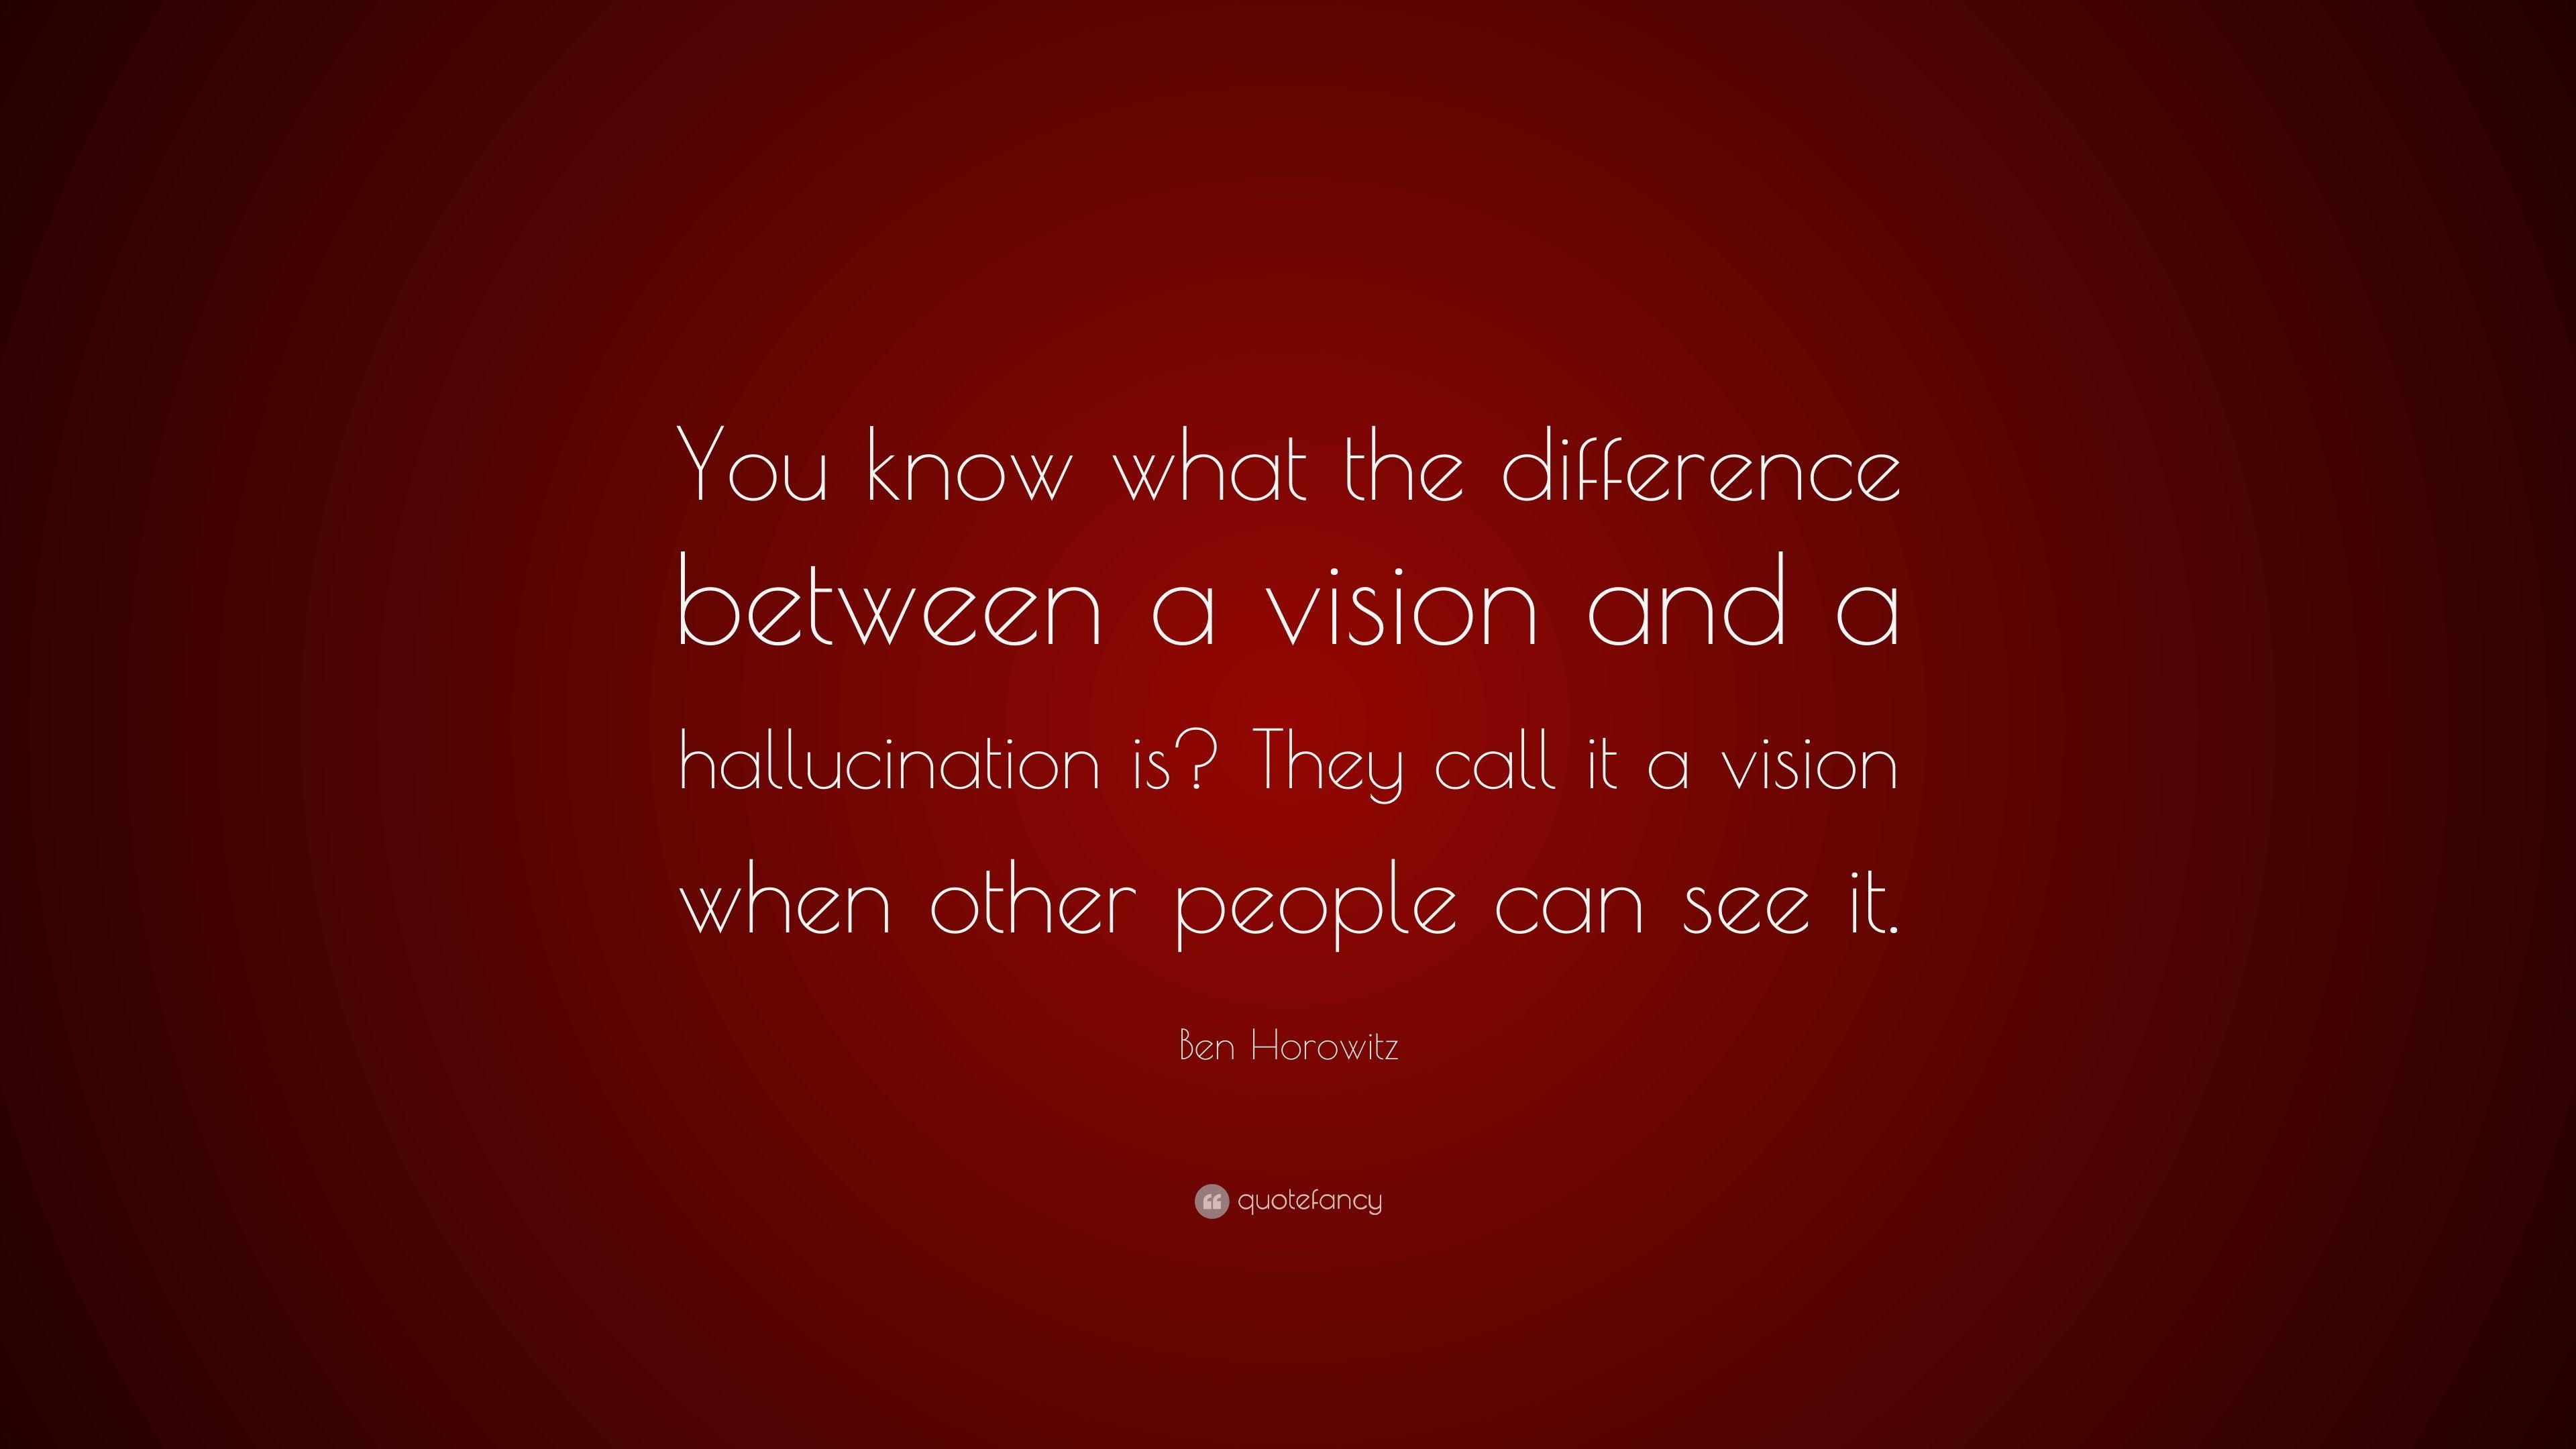 Ben Horowitz Quote: “You know what the difference between a vision